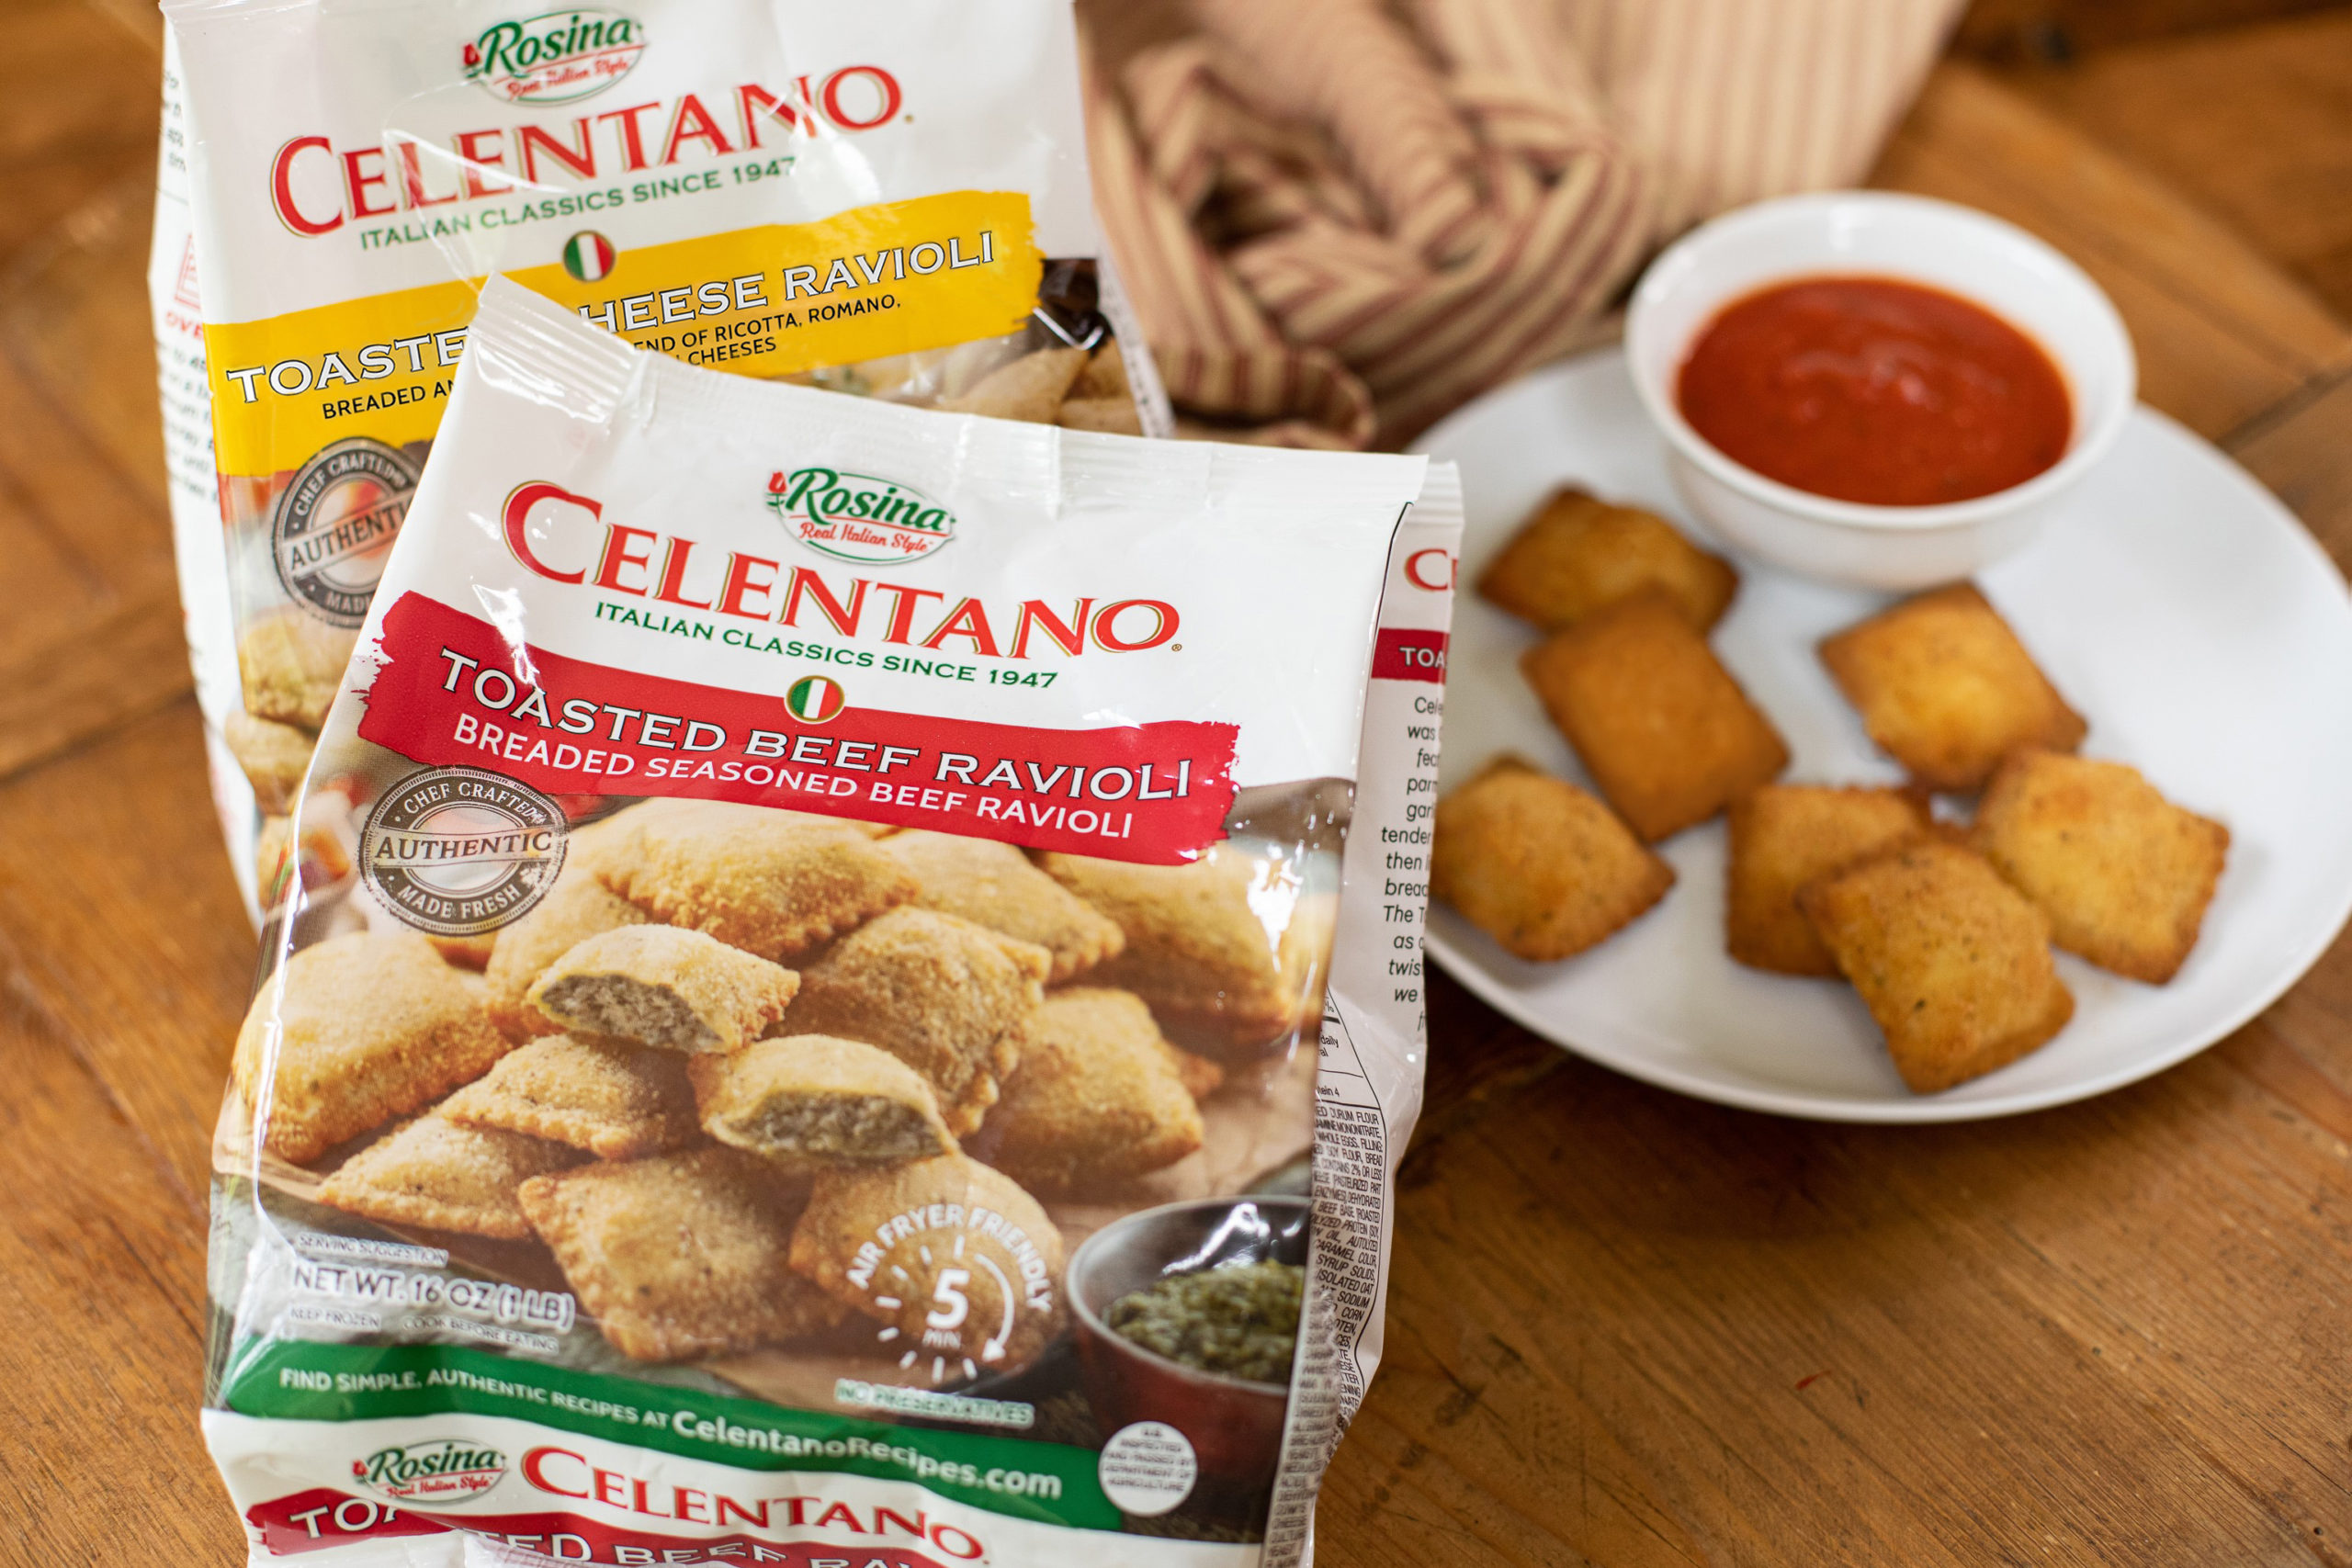 Try New Celentano Toasted Ravioli - On Sale Buy One, Get One FREE At Publix on I Heart Publix 3